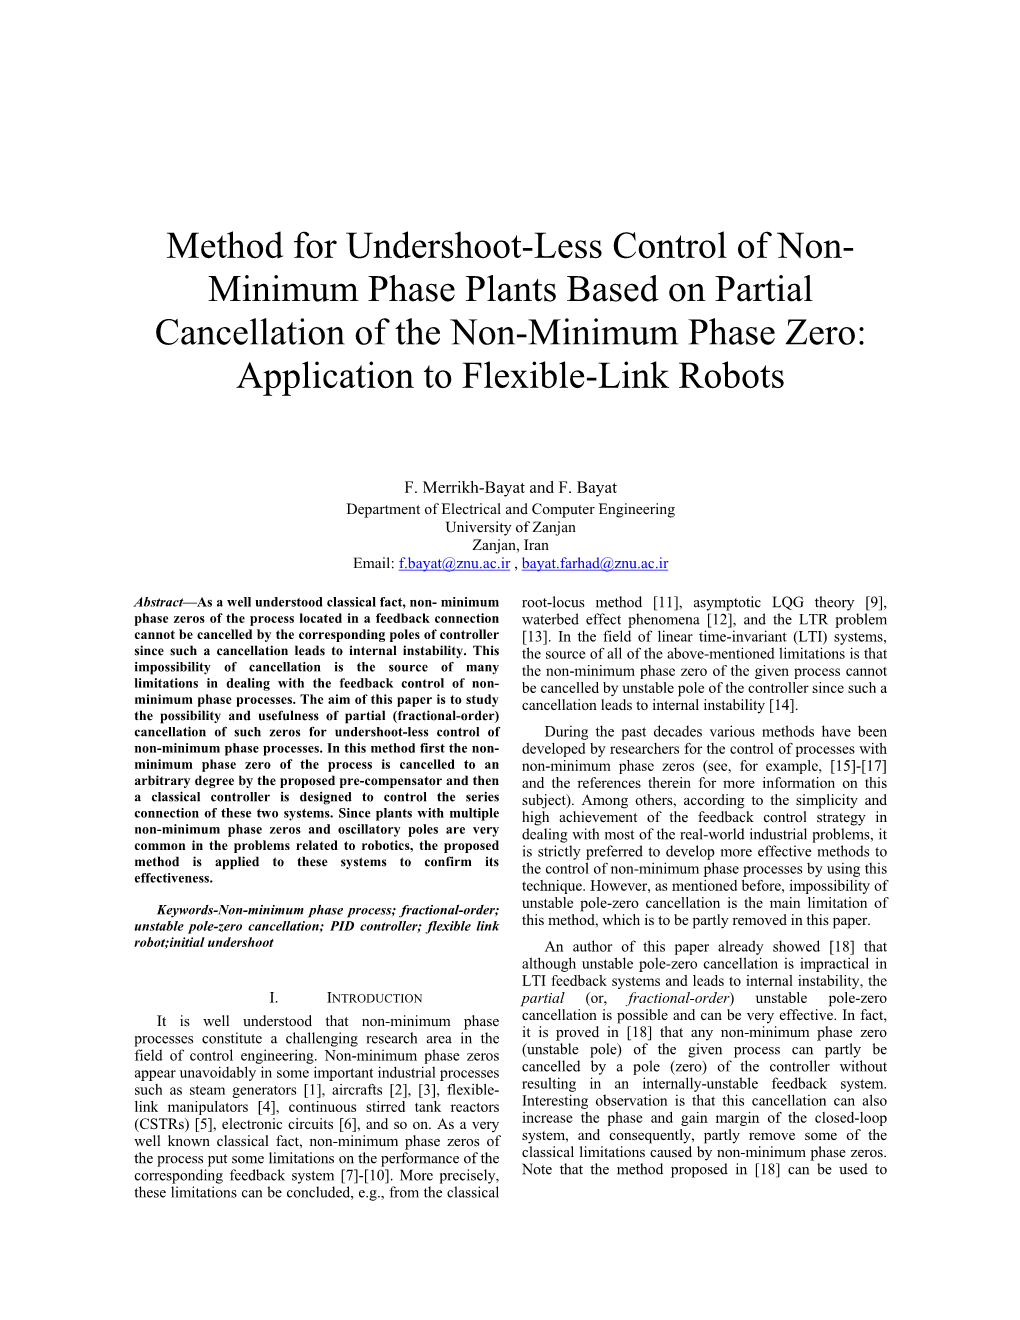 Method for Undershoot-Less Control of Non- Minimum Phase Plants Based on Partial Cancellation of the Non-Minimum Phase Zero: Application to Flexible-Link Robots